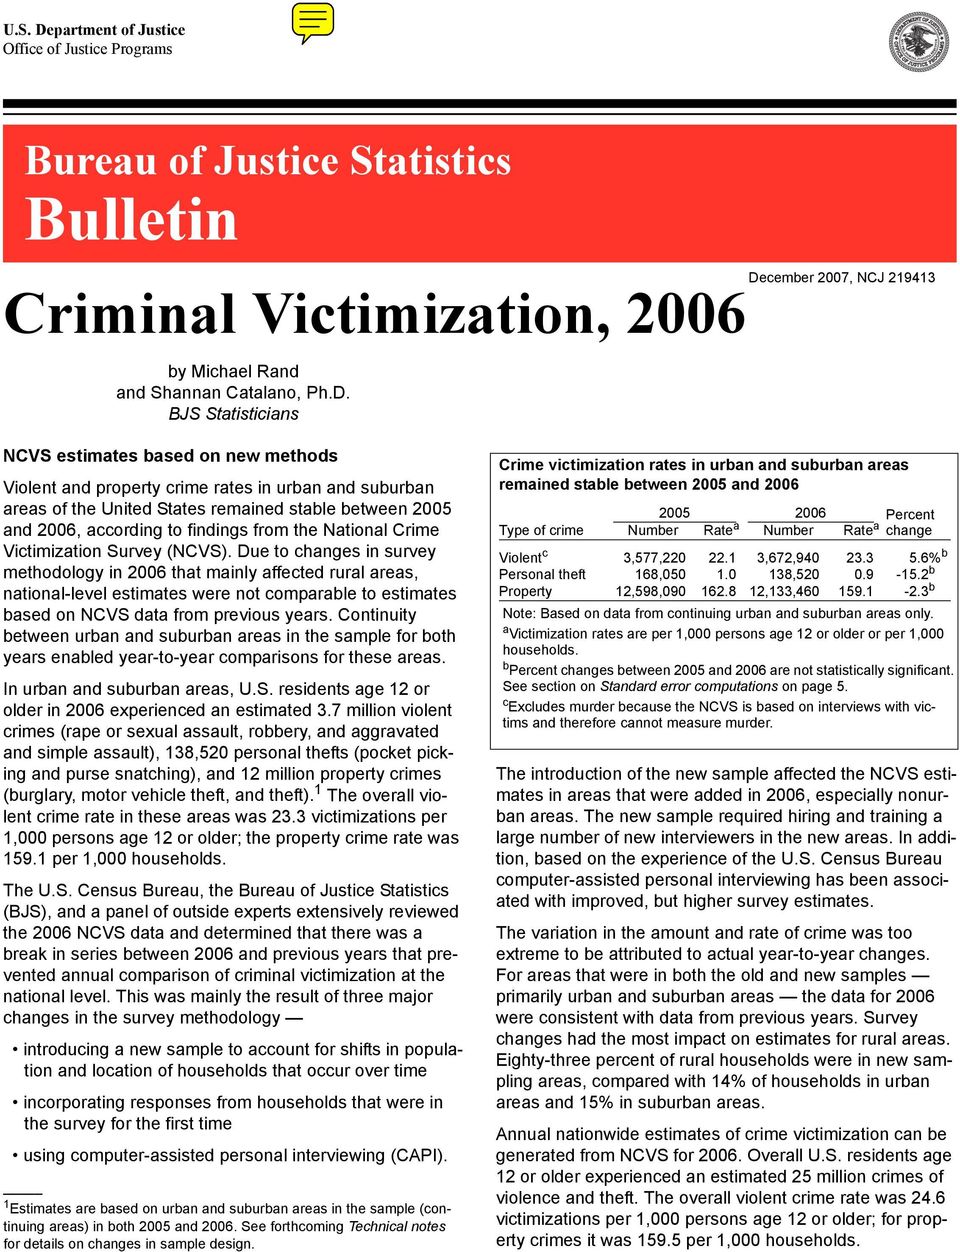 "#$ estimates,ase- o/ /e0 met1o-s Violent and property crime rates in urban and suburban areas of the United States remained stable between 2005 and 2006, according to findings from the National